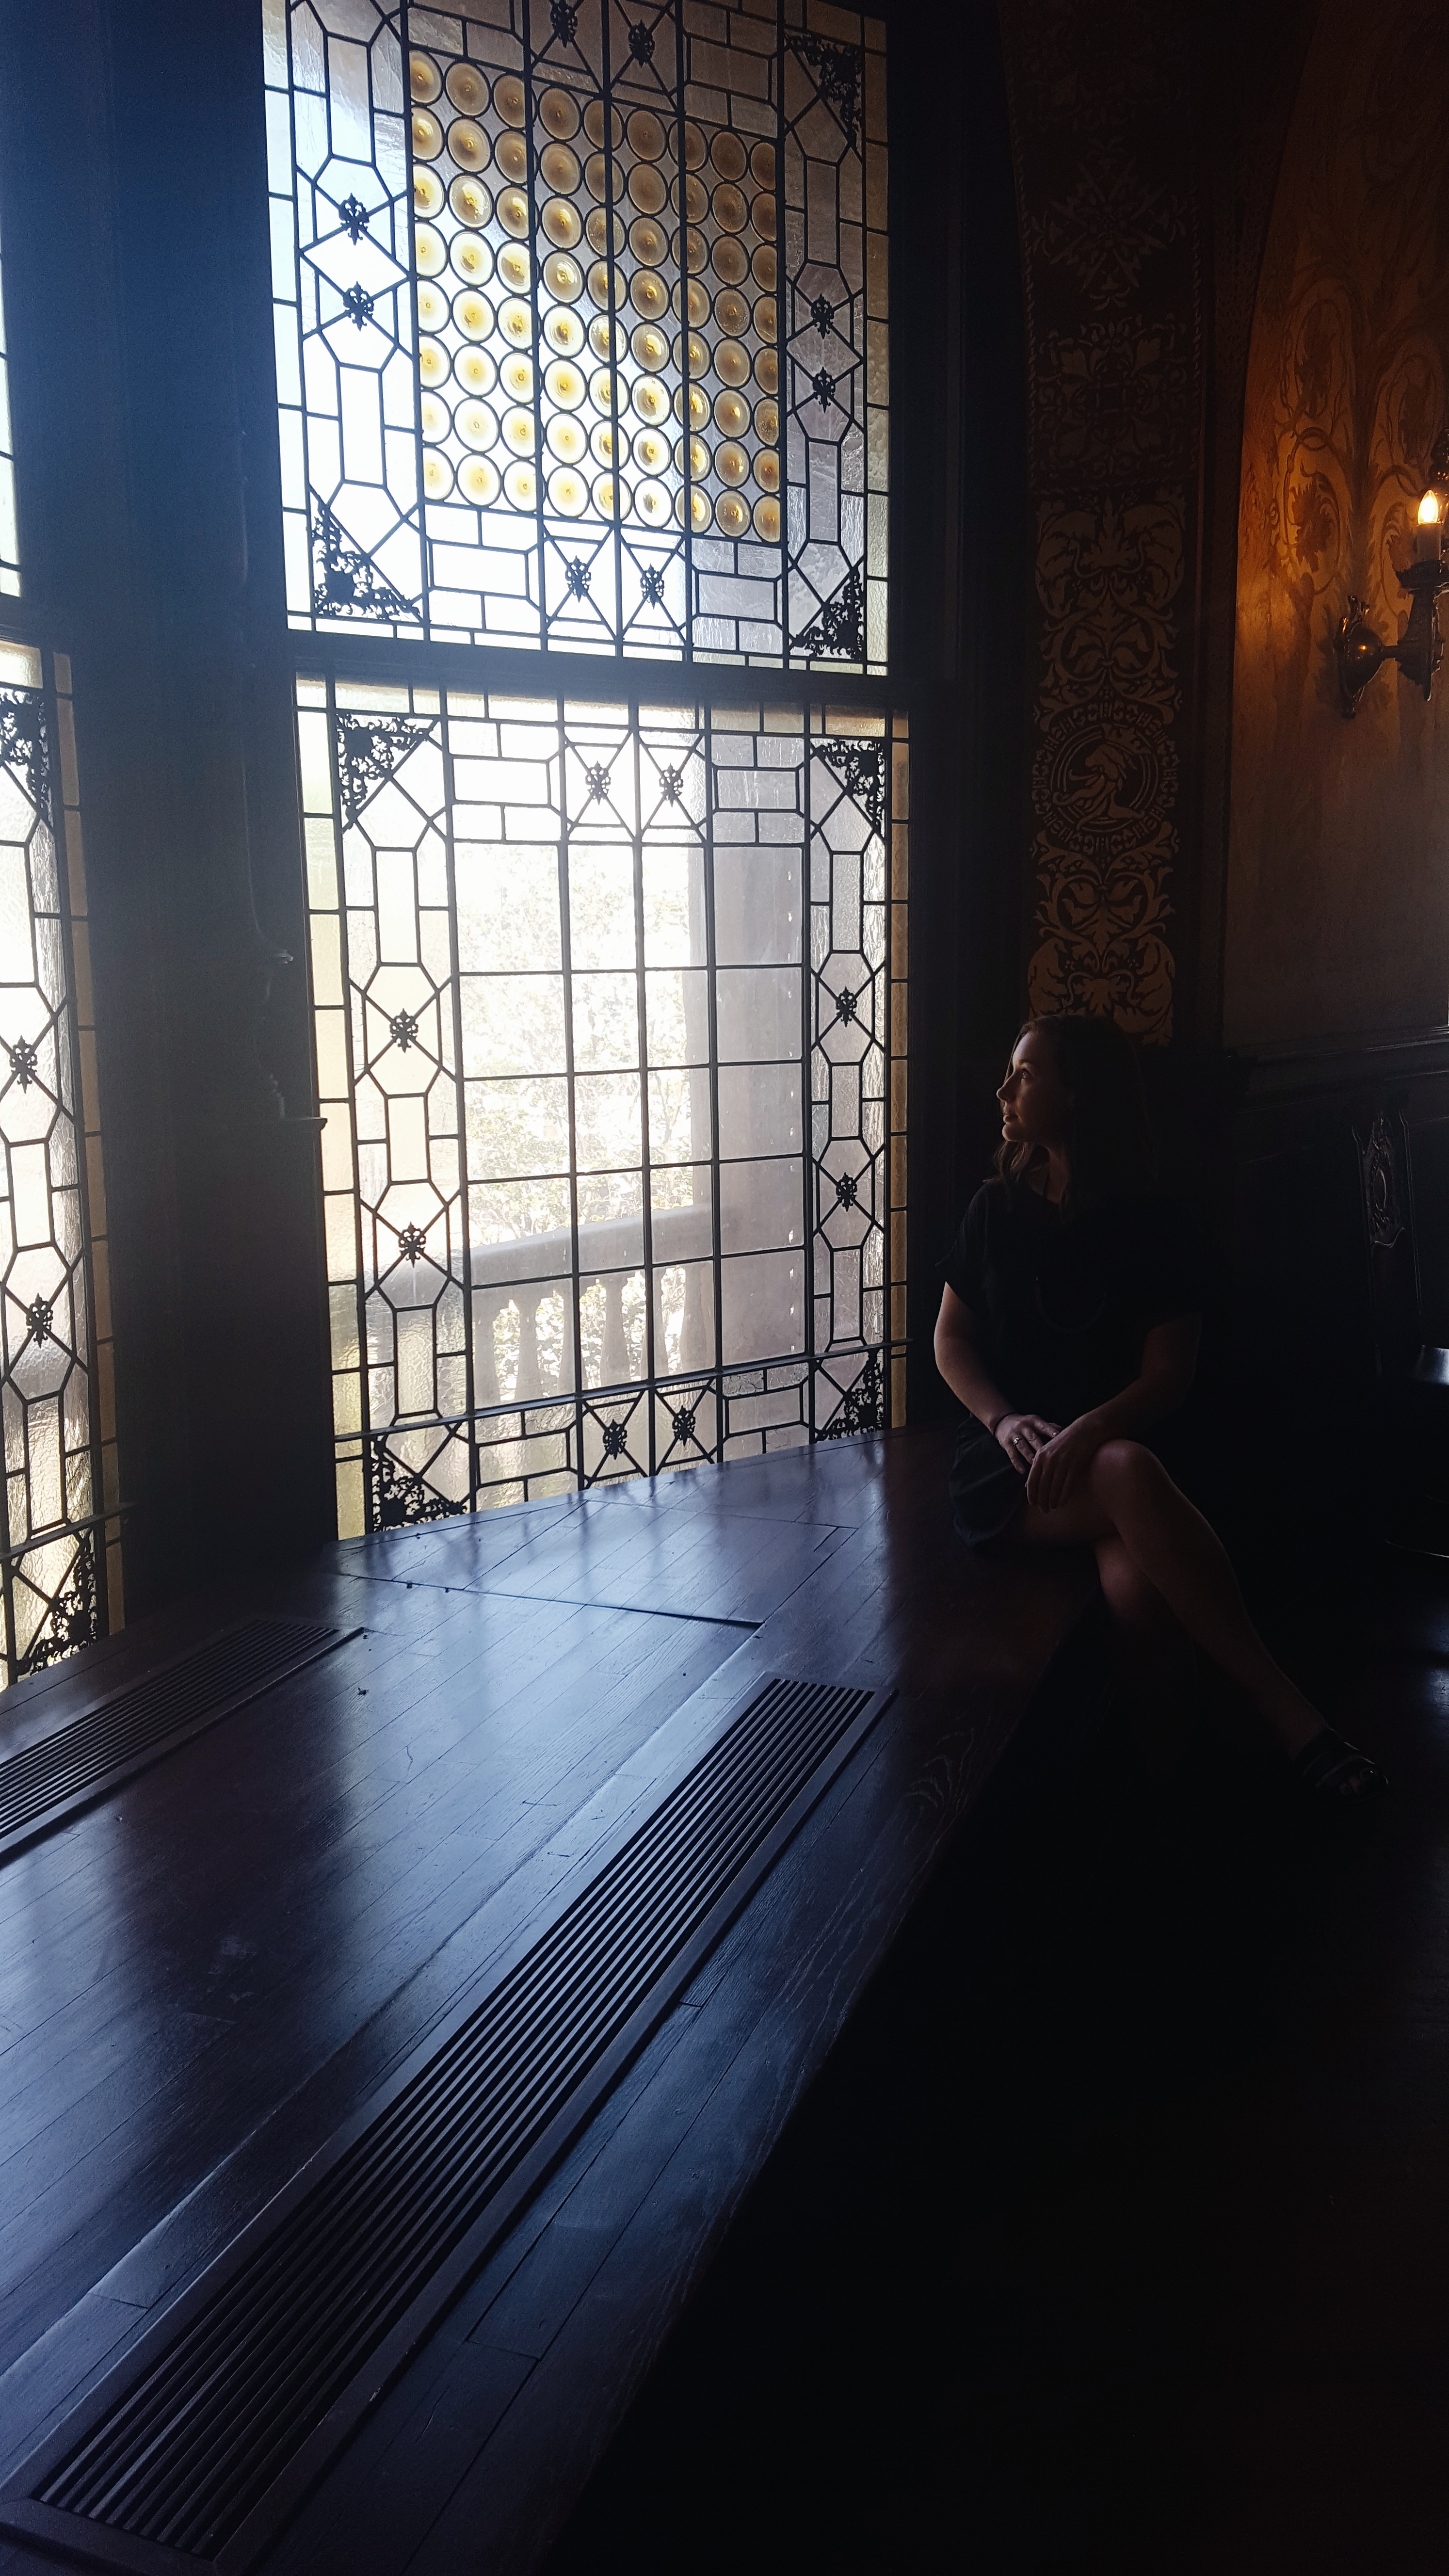 Alyssa looks out the Tiffany glass windows at Flagler College in St. Augustine